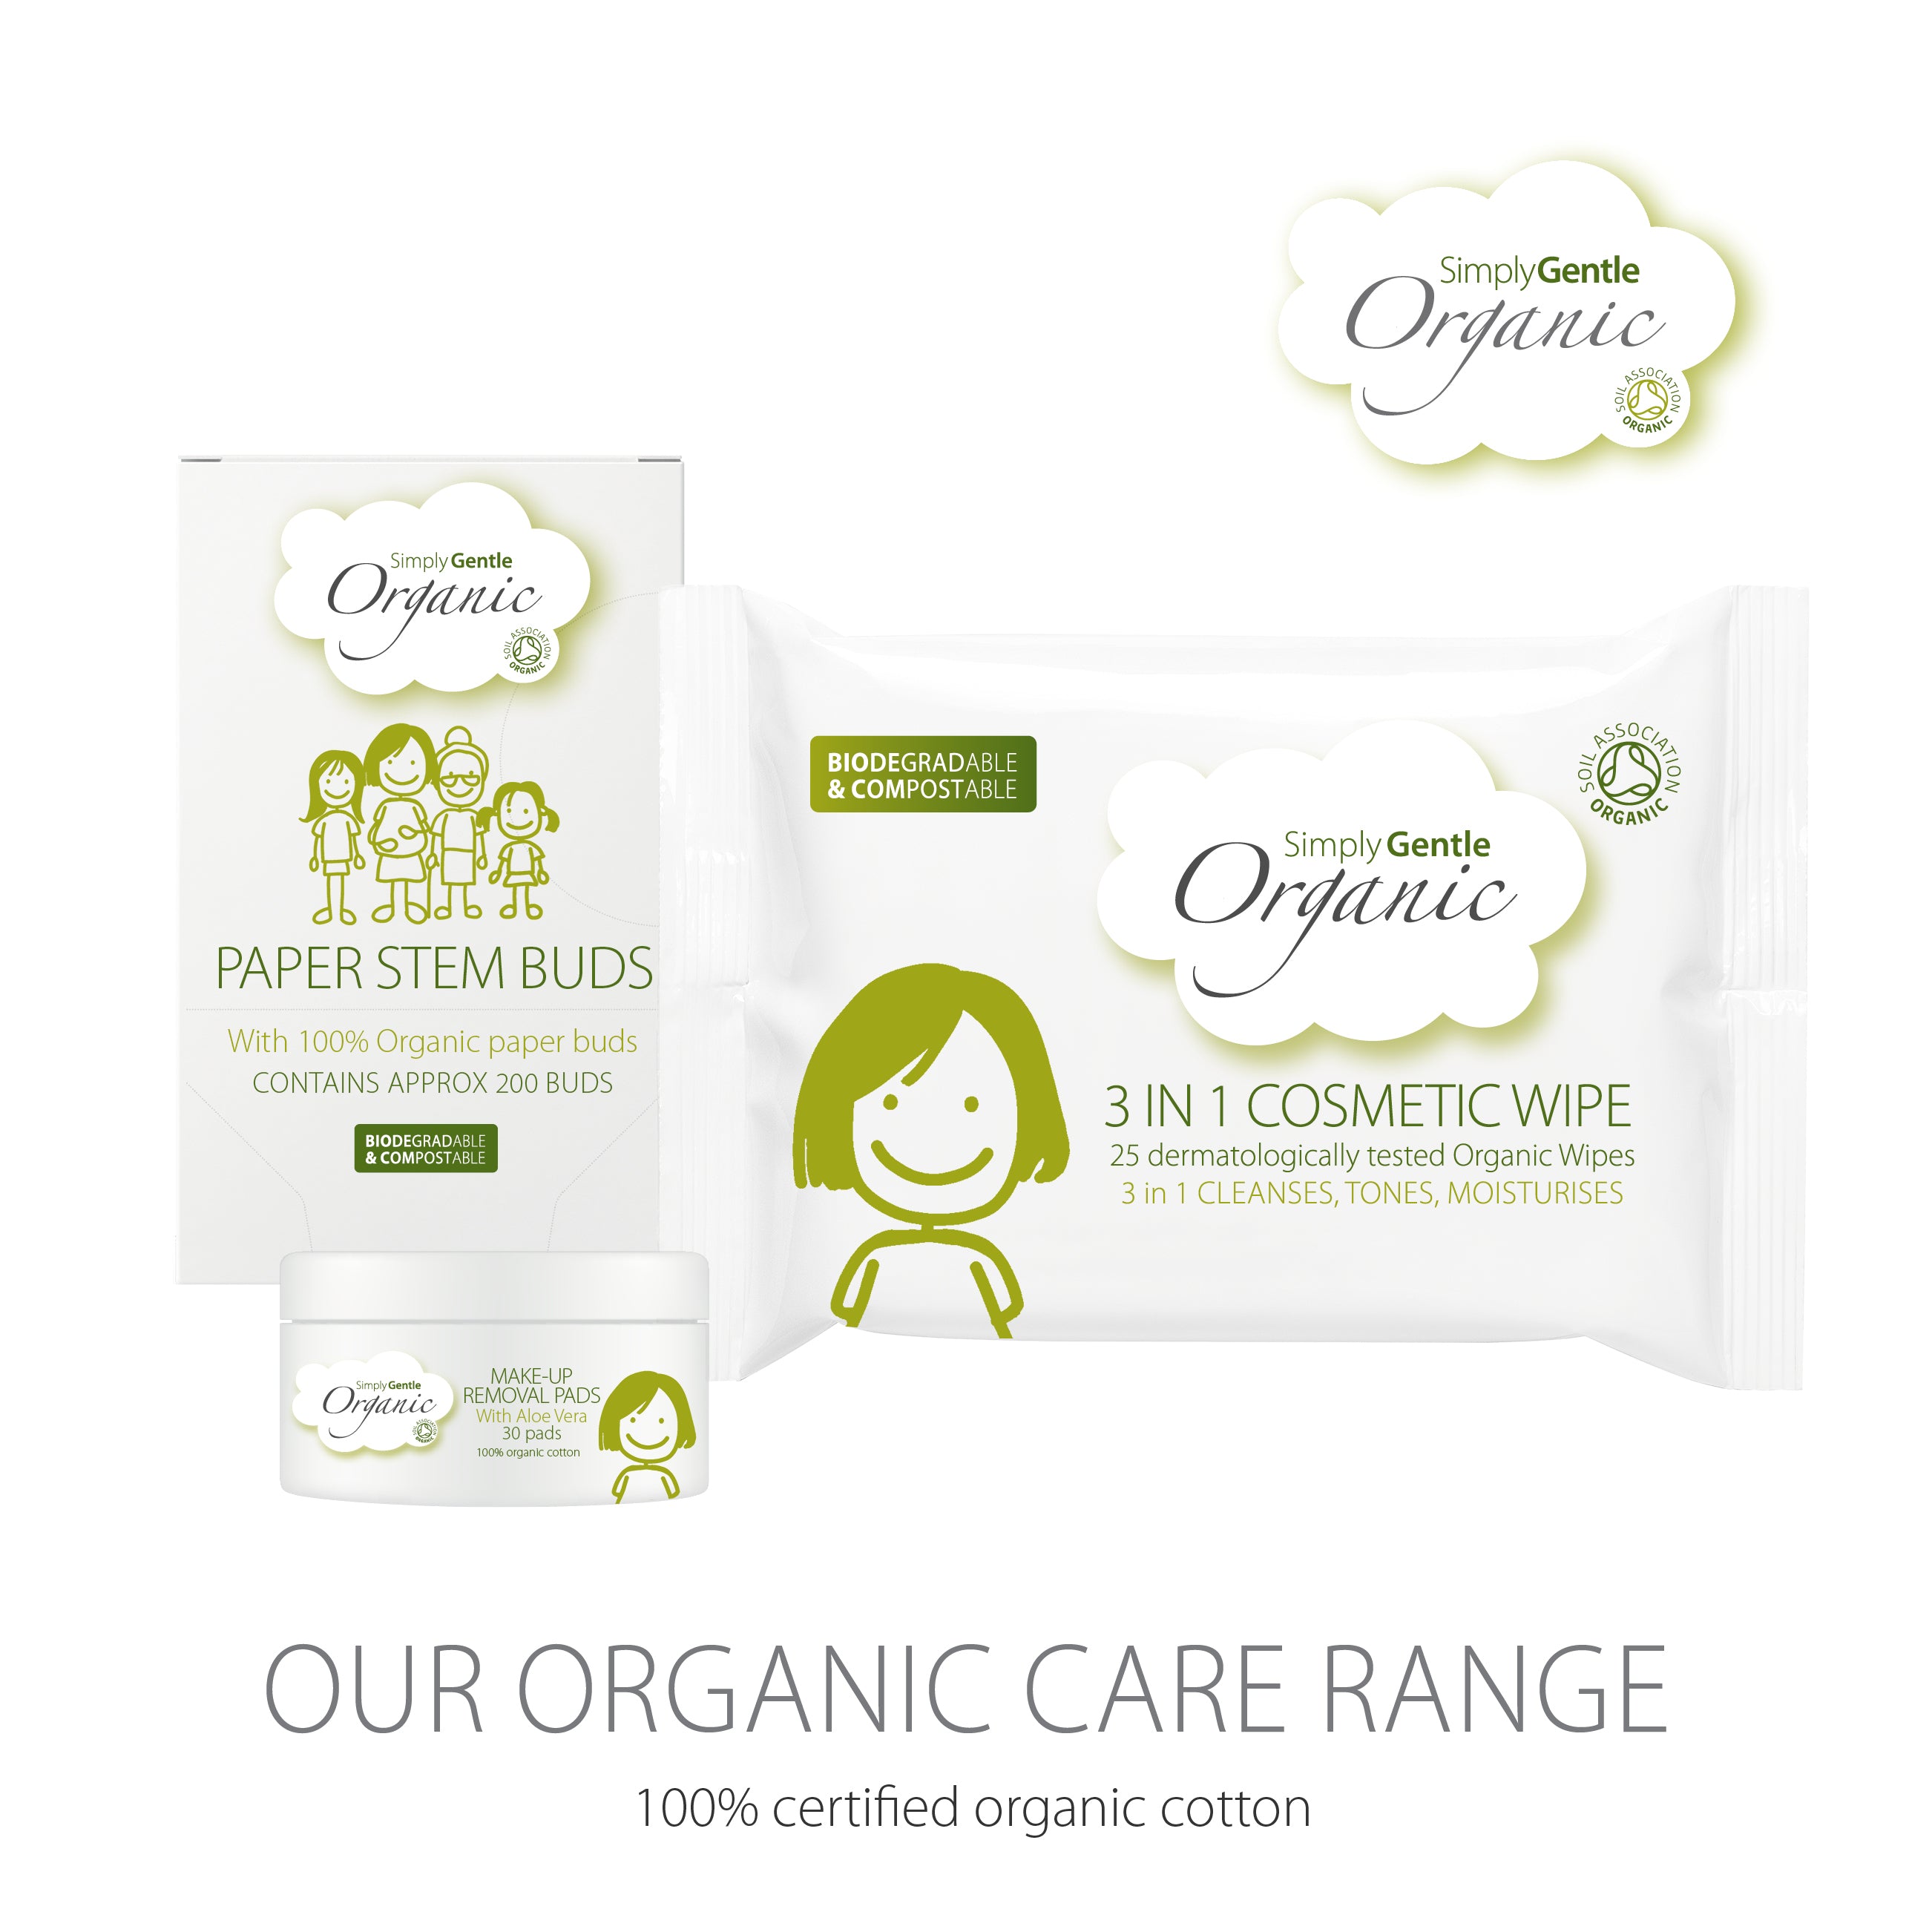 Simply Gentle Organic and Pittapatta bodycare ranges, the whole range is made from natural and organic ingredients and infused with organic essential oils and flower essences designed to be gentle and a joy to use. We know how important healthcare is to you and your family, and all our existing and new products have been developed to combine natural and organic ingredients with practical family care, which is why all our products are only made with the finest and softest organic materials. 